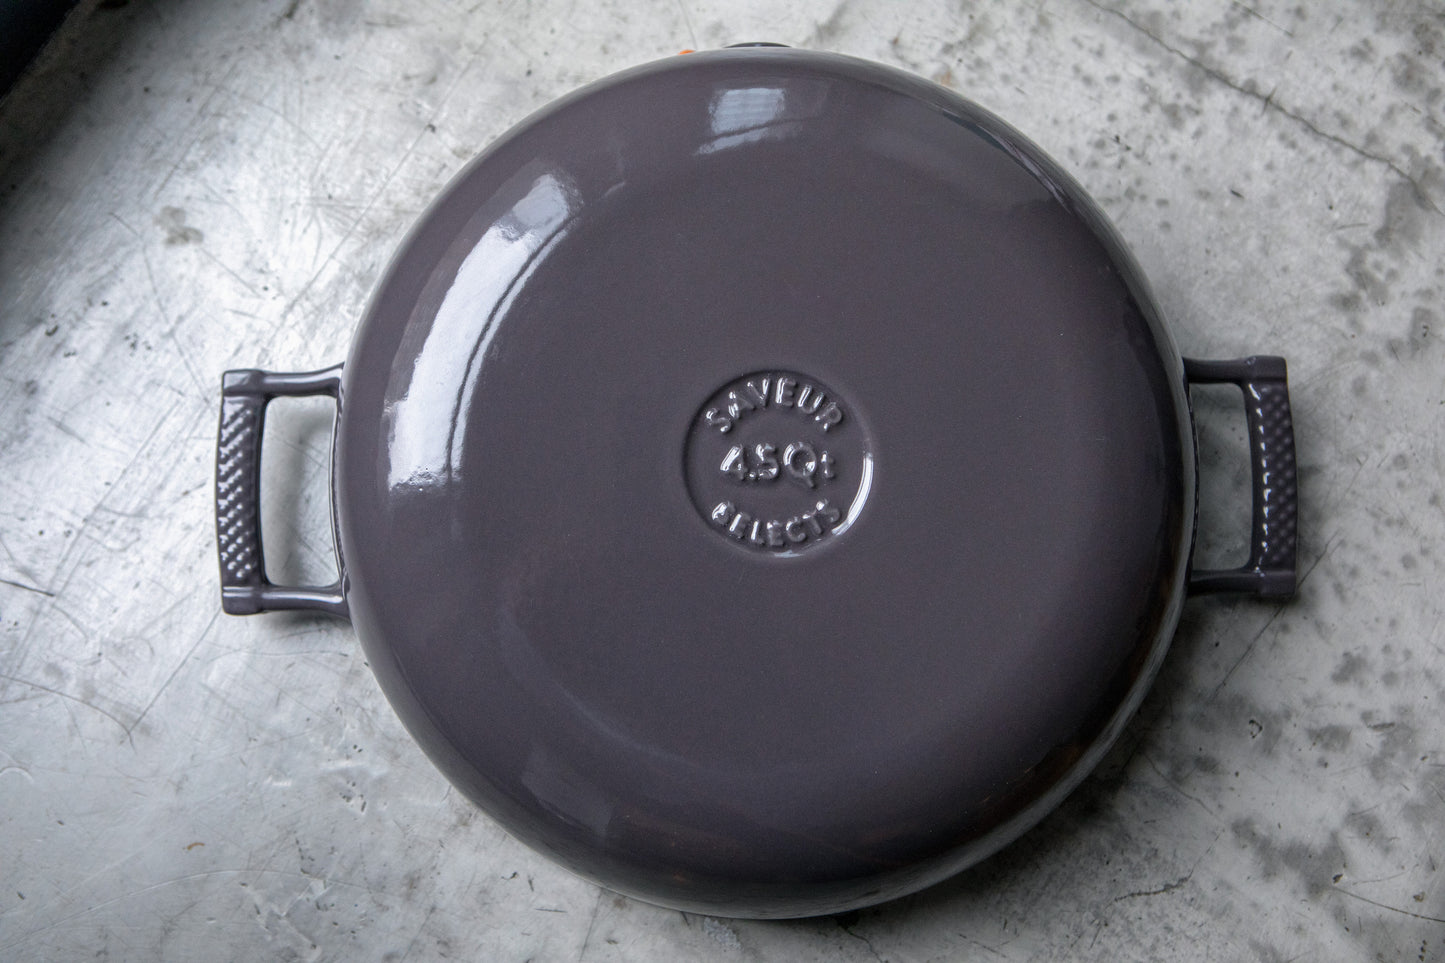 4.5-Quart Enameled Coated Braiser with Stainless Steel Lid